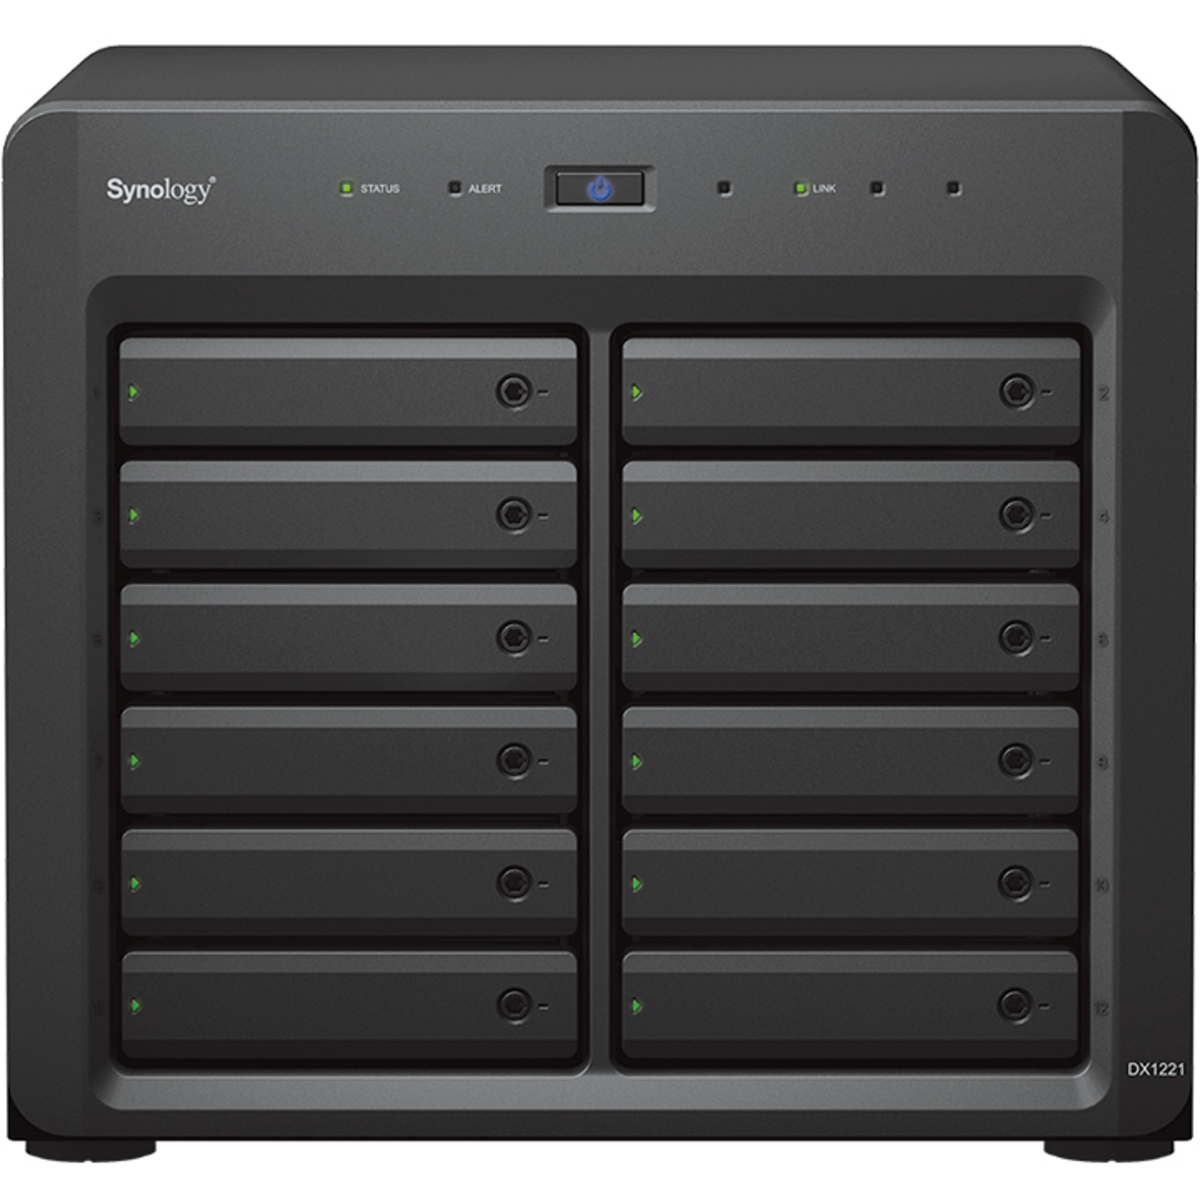 Synology DX1222 External Expansion Drive 22tb 12-Bay Desktop Multimedia / Power User / Business Expansion Enclosure 11x2tb Seagate IronWolf Pro ST2000NT001 3.5 7200rpm SATA 6Gb/s HDD NAS Class Drives Installed - Burn-In Tested DX1222 External Expansion Drive